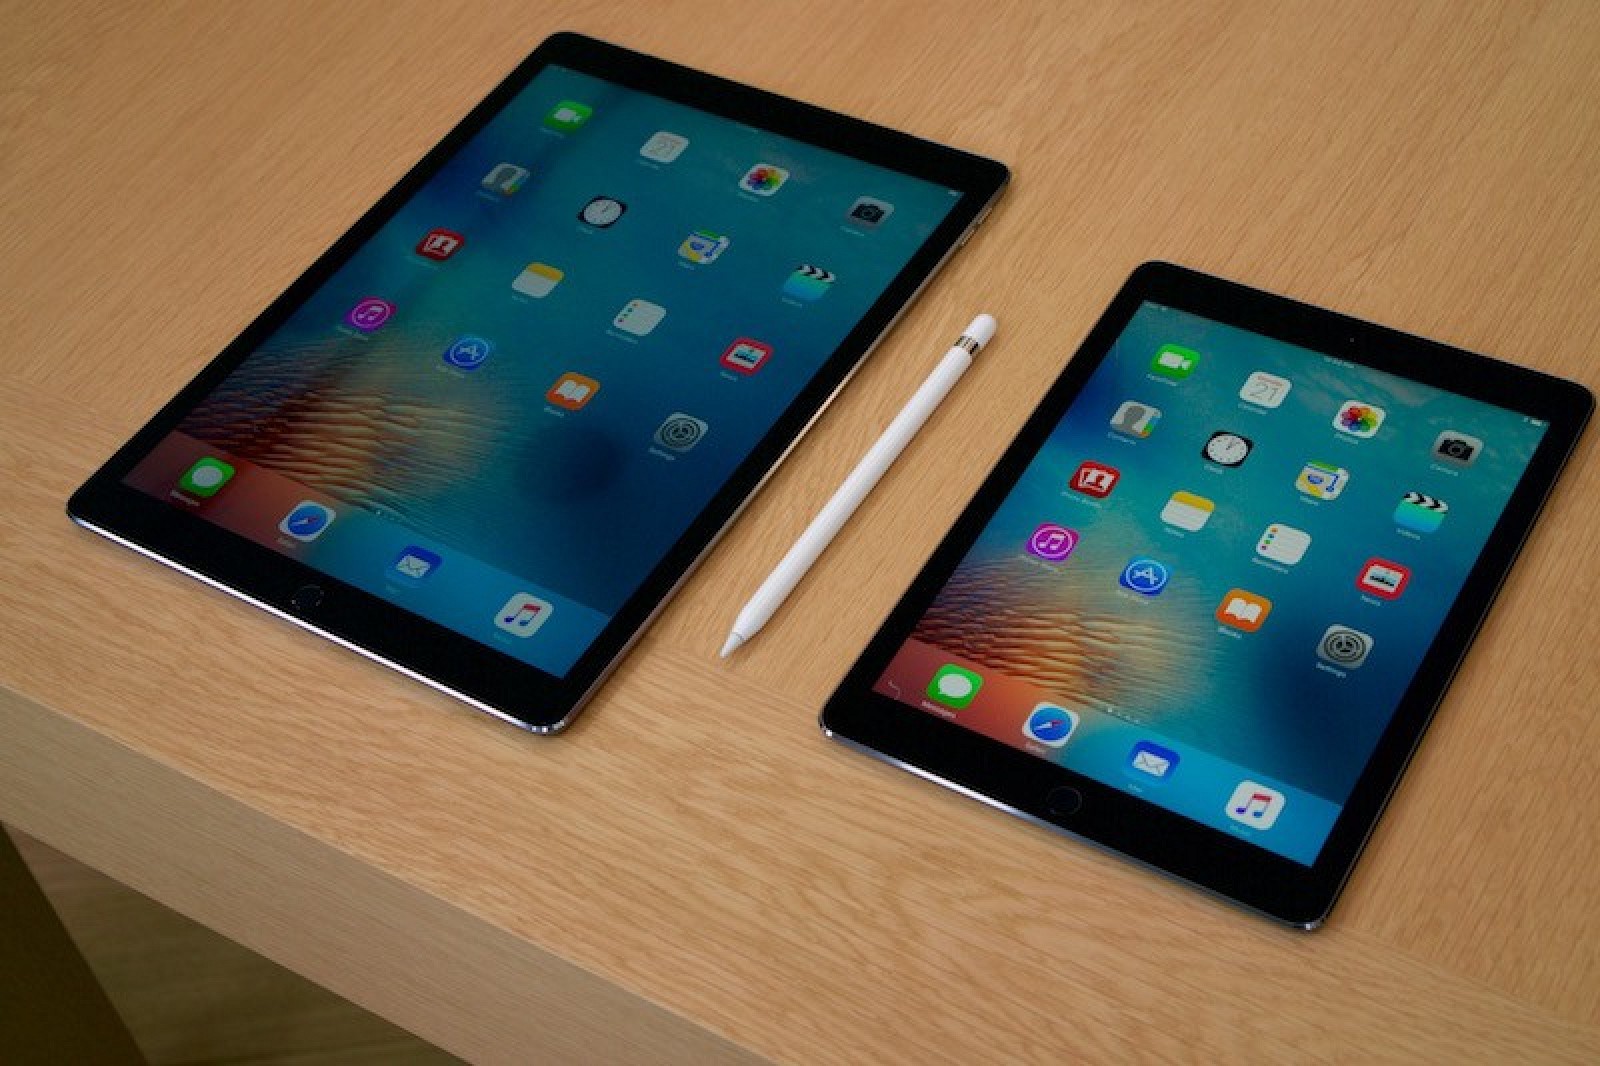 Review Roundup: 9.7" iPad Pro is a 'Powerful' Laptop Replacement for